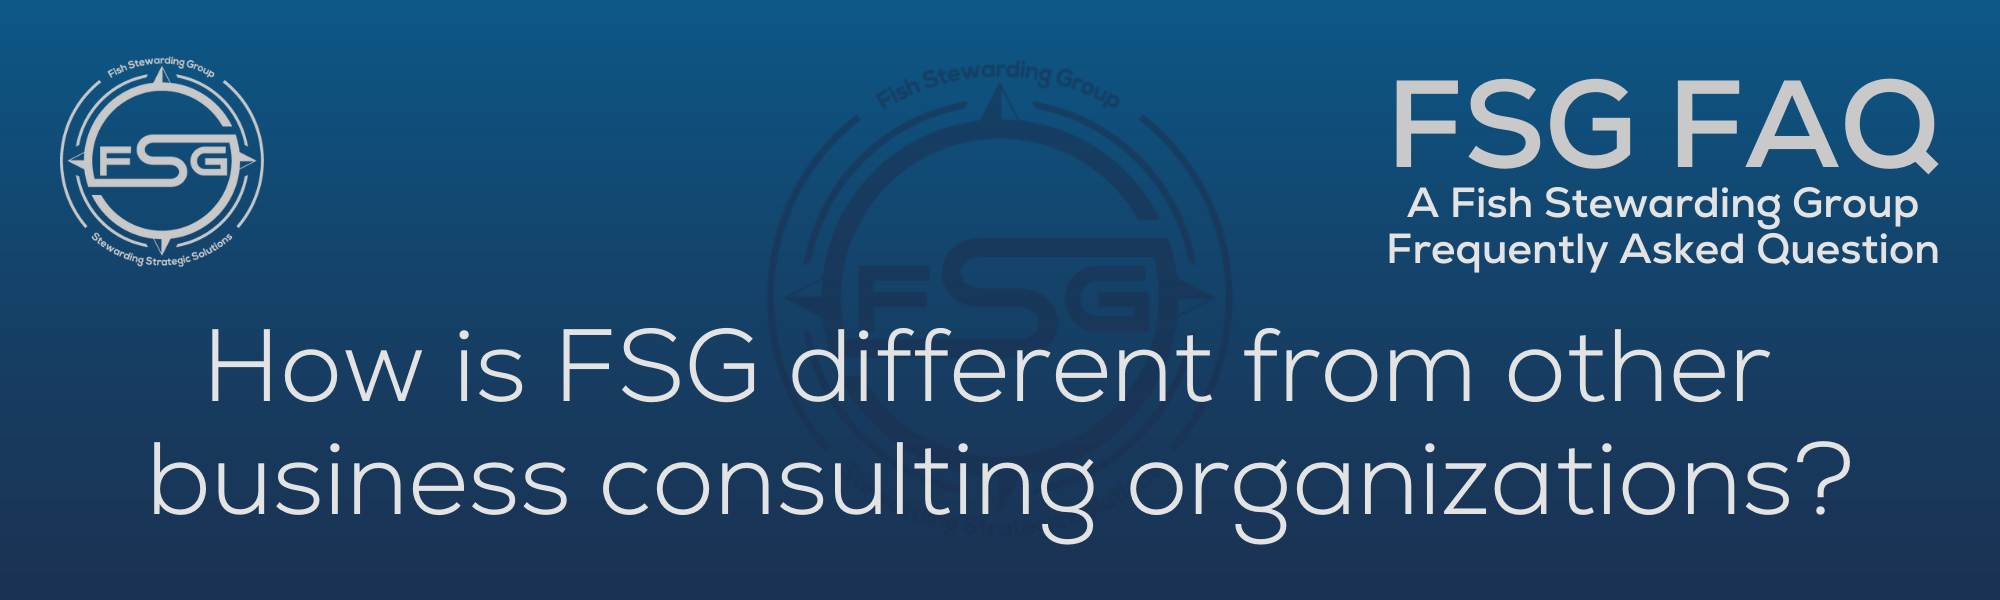 A rectangular and long thing Footer FAQ Image on the bottom of the How is FSG different? Page on the website. The background is a blue gradient color that goes from a dark blue on the bottom to a lighter blue on top. The text in lower center of the image in a light gray text that reads: How is FSG different? The text in gray in the upper right corner reads: FSG FAQ. Right beneath that is more gray text in a smaller font that reads: A Fish Stewarding Group Frequently Asked Question. On the upper left side is the FSG Logo in gray. The logo has the letters FSG in the middle with a circle with four pointed arrows facing north, south, east and west with the S connected to that circle. Four rounded lines make the next circle of the circle and the last layer is a thin circle with the text on the Bottom that reads Stewarding Strategist Solutions and on top, the text reads Fish Stewarding Group. And Lastly in the center background of the image is a watermarked FSG logo, faded in blue, in the background.